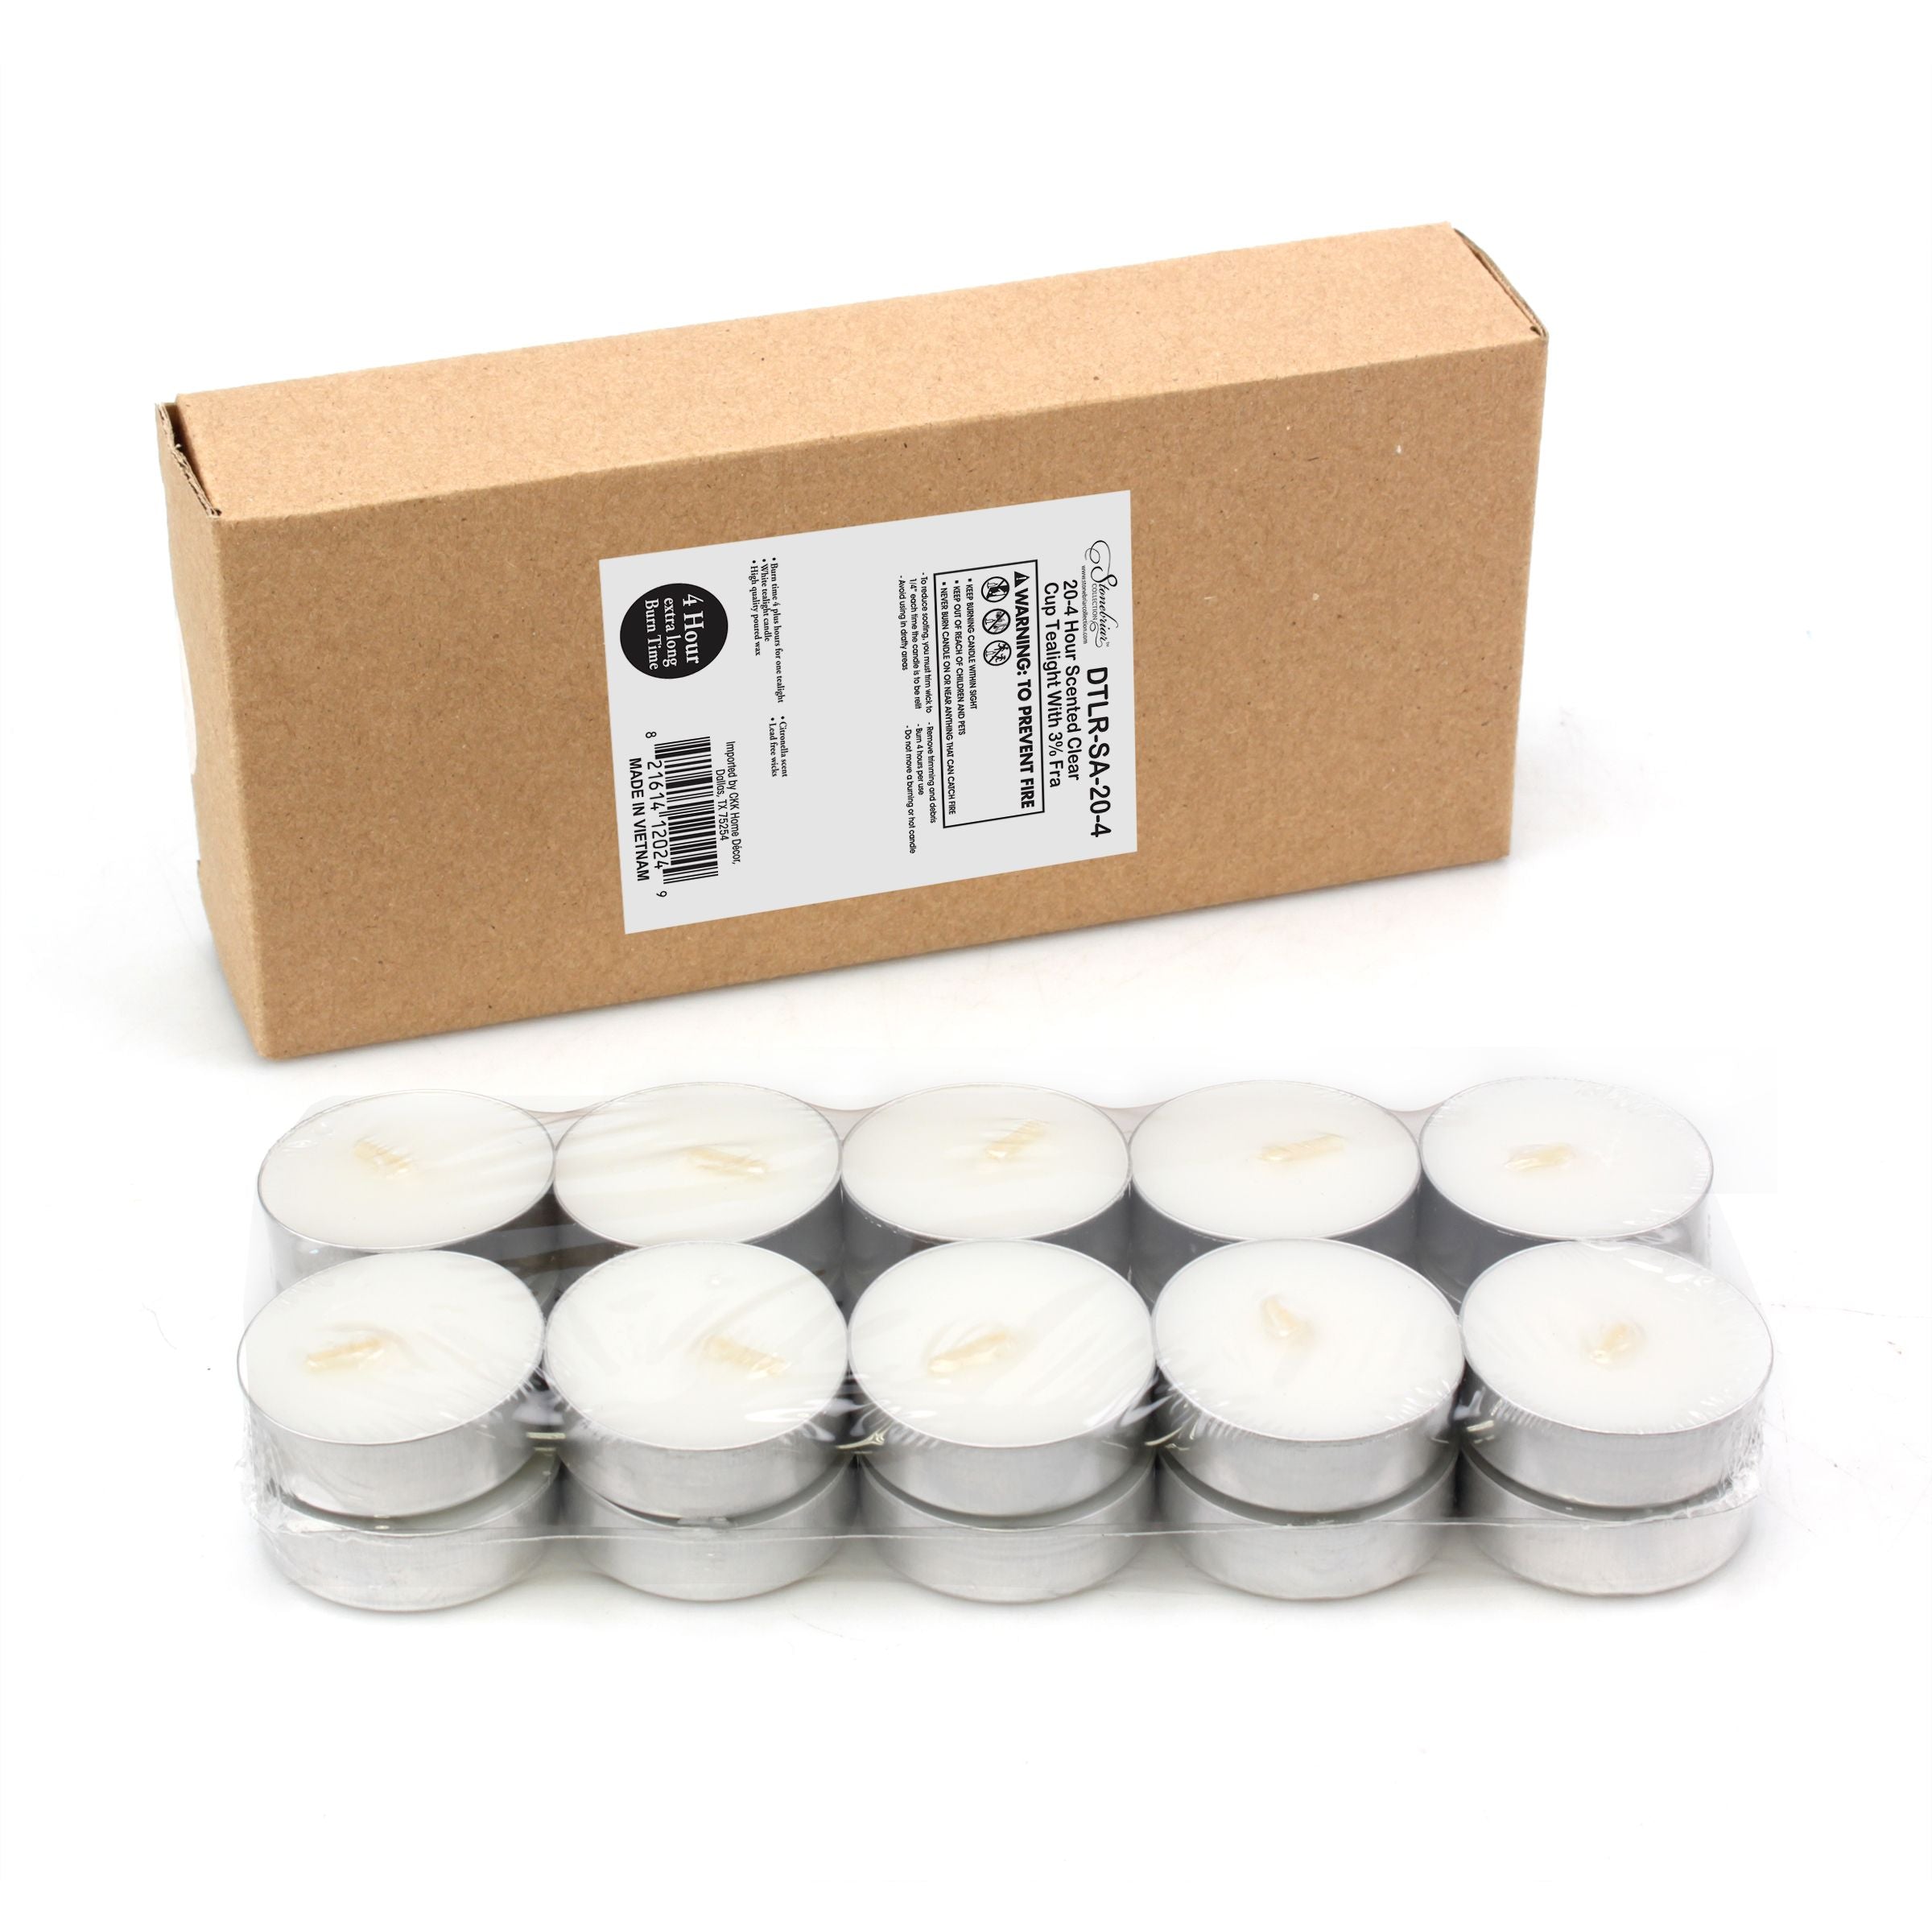 Tealight Candles – Stonebriar Collection